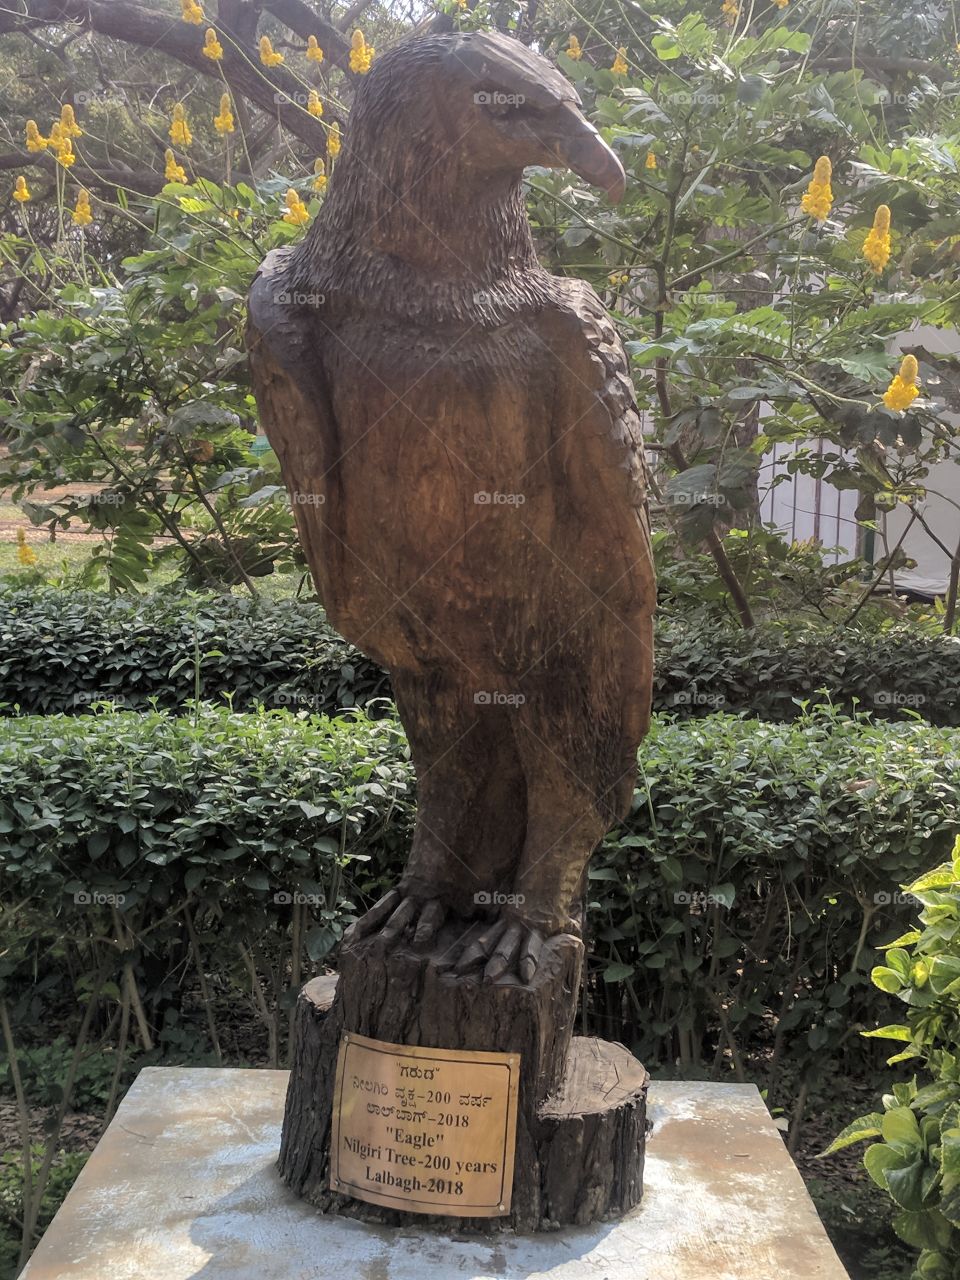 Eagle of the woods